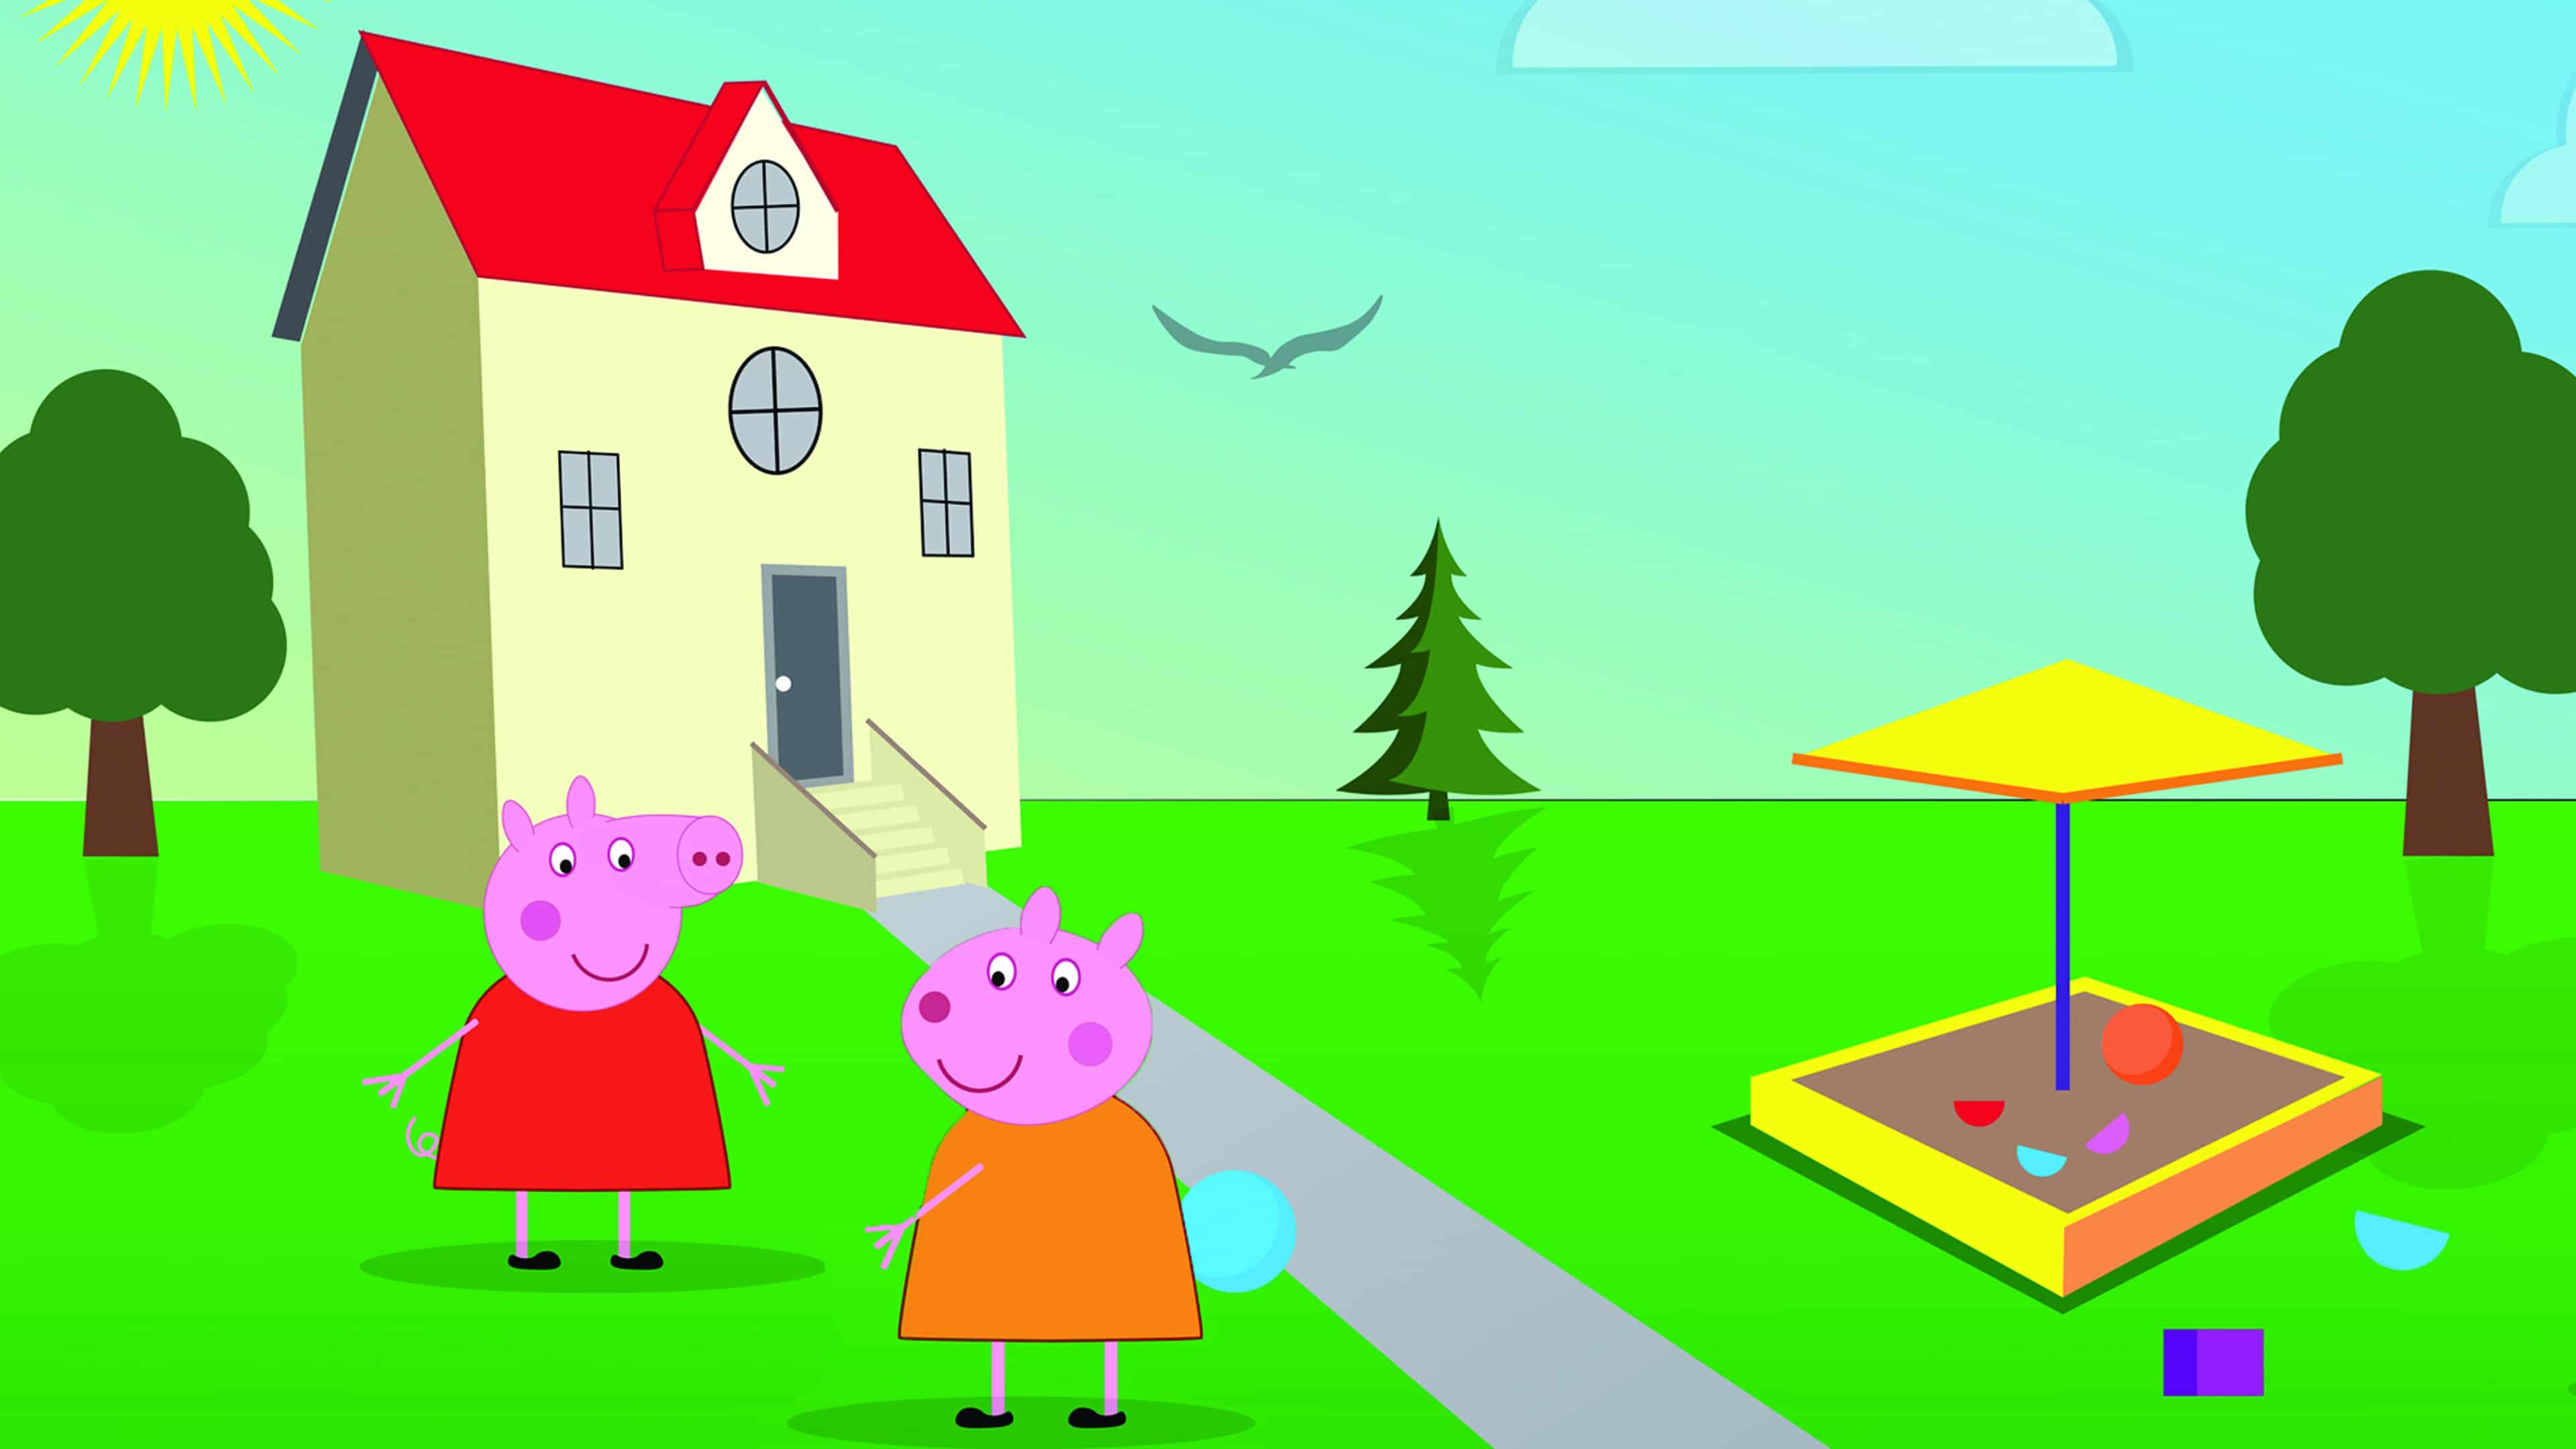 Download A Close-up Look at Peppa Pig's Famous House Wallpaper, Wallpapers.com